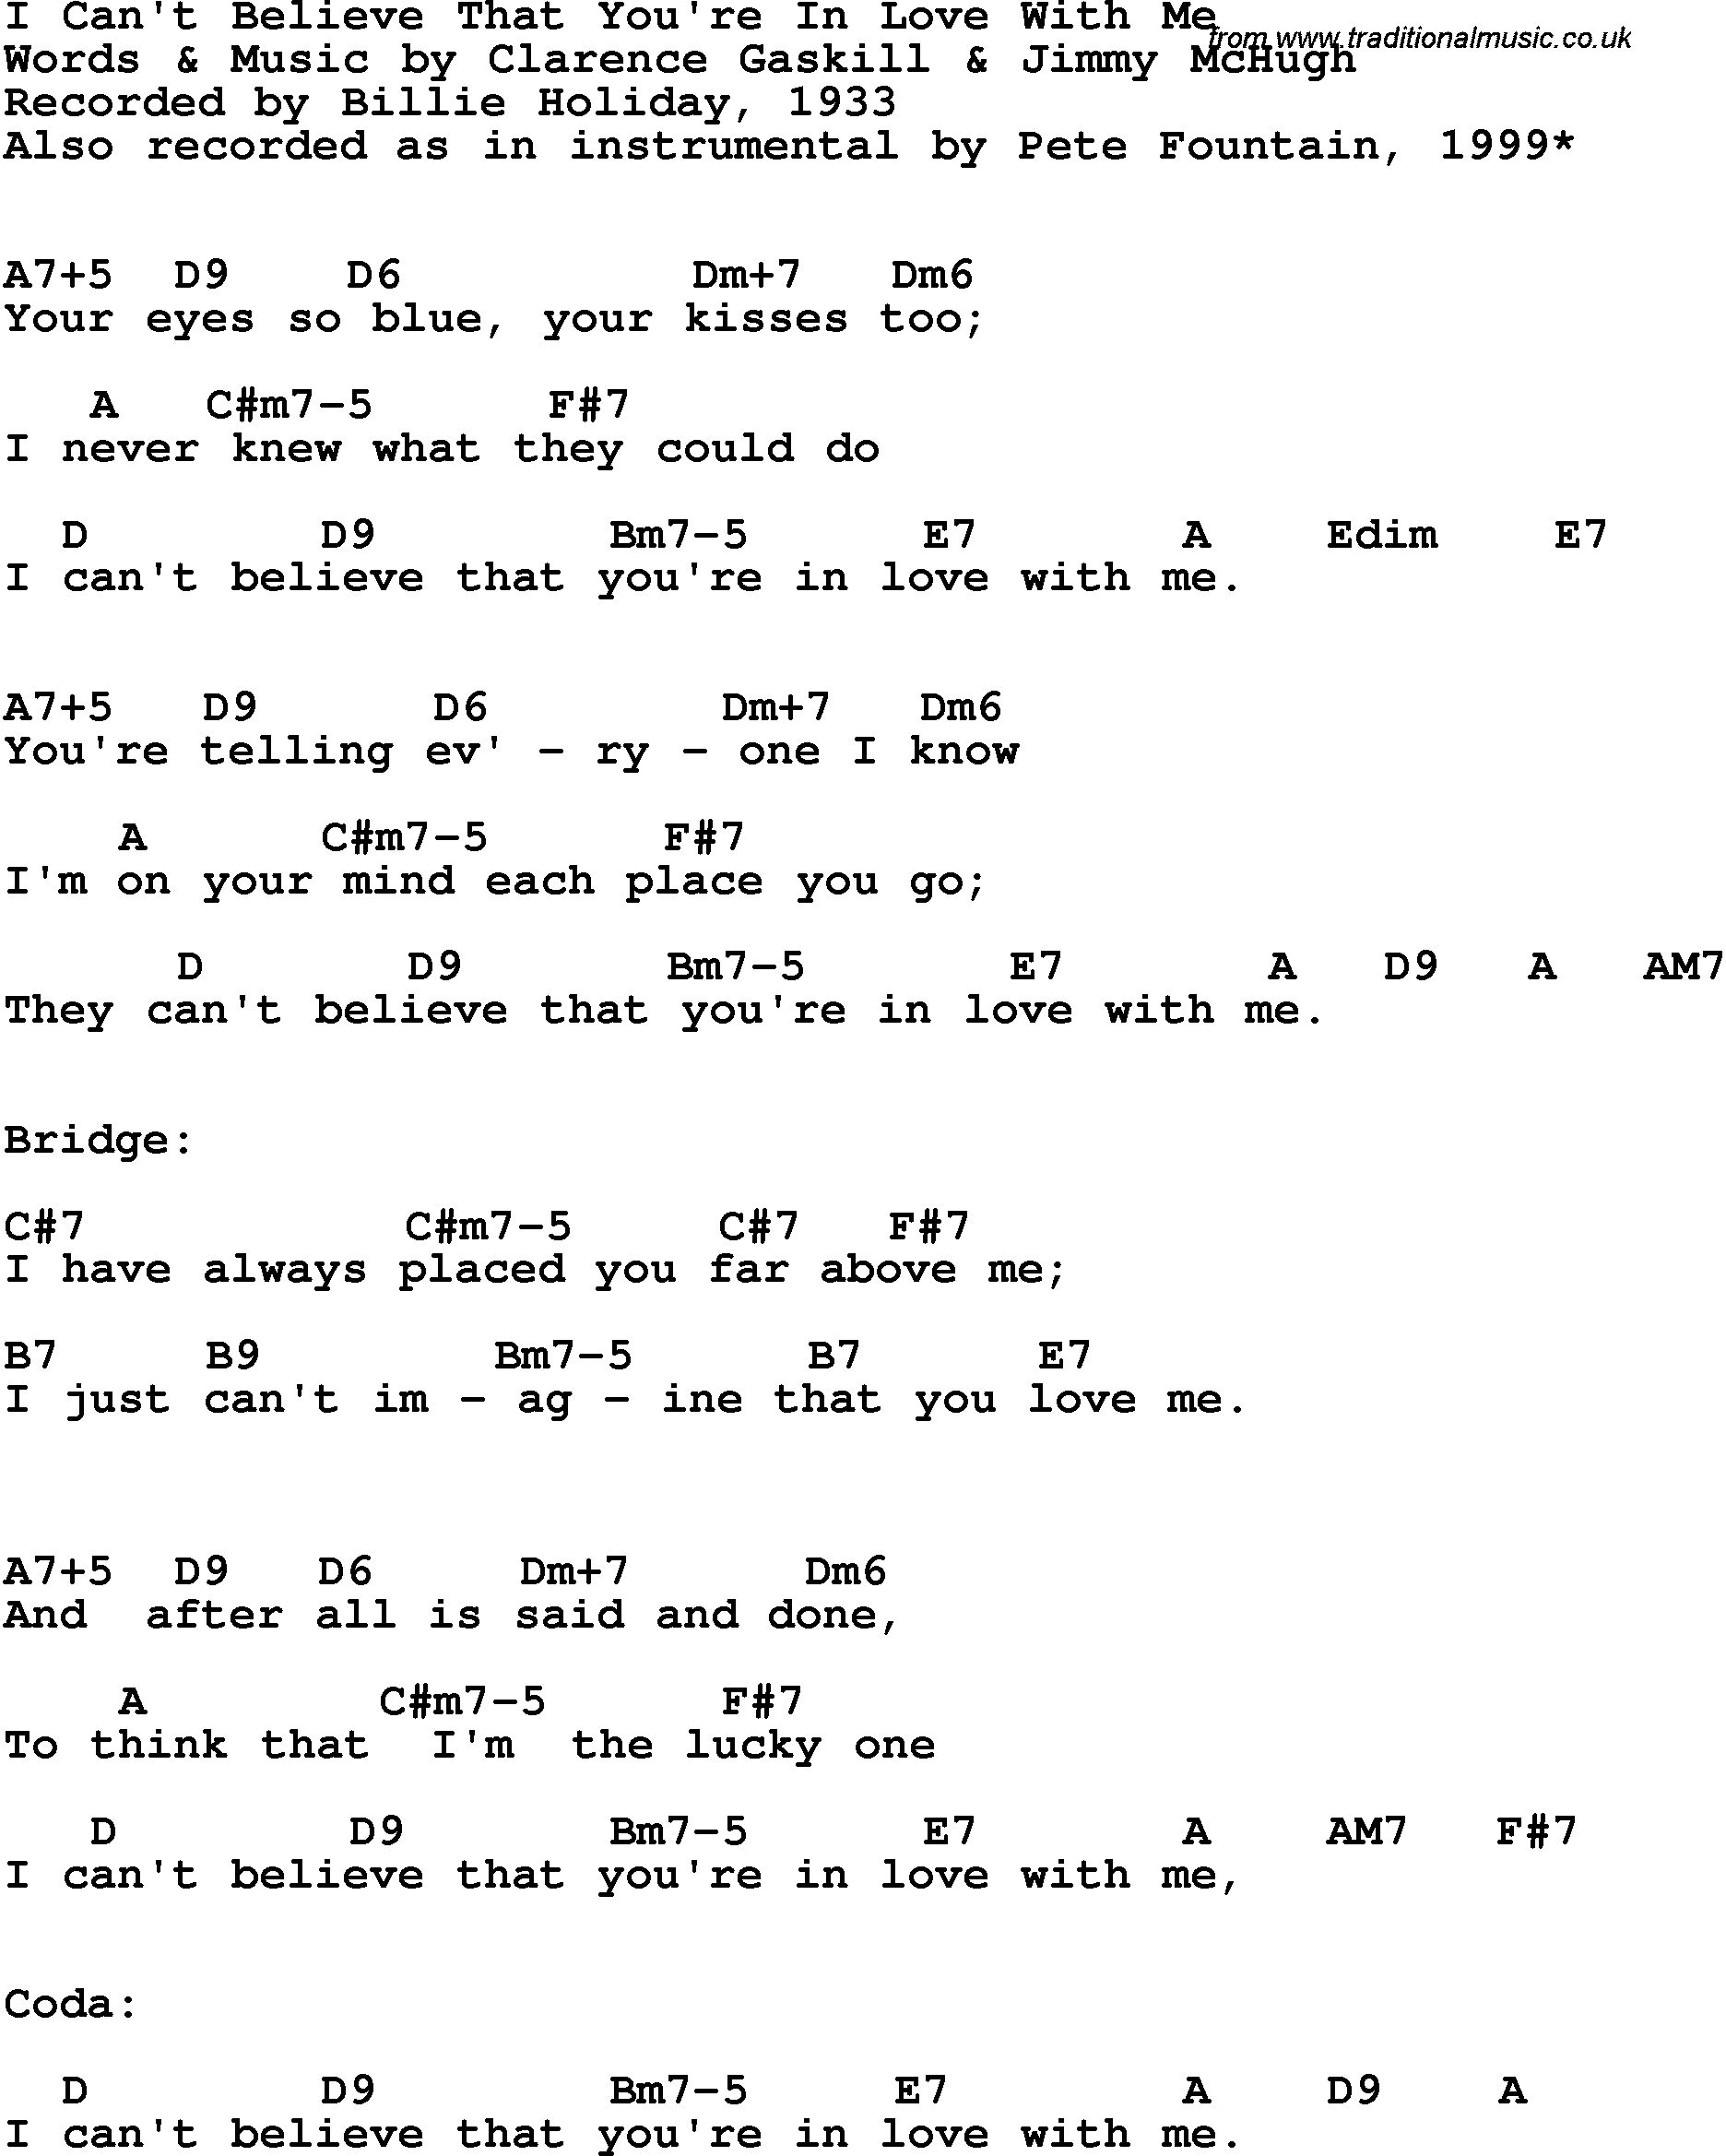 Song Lyrics with guitar chords for I Can't Believe That You're In Love With Me - Billie Holiday, 1933